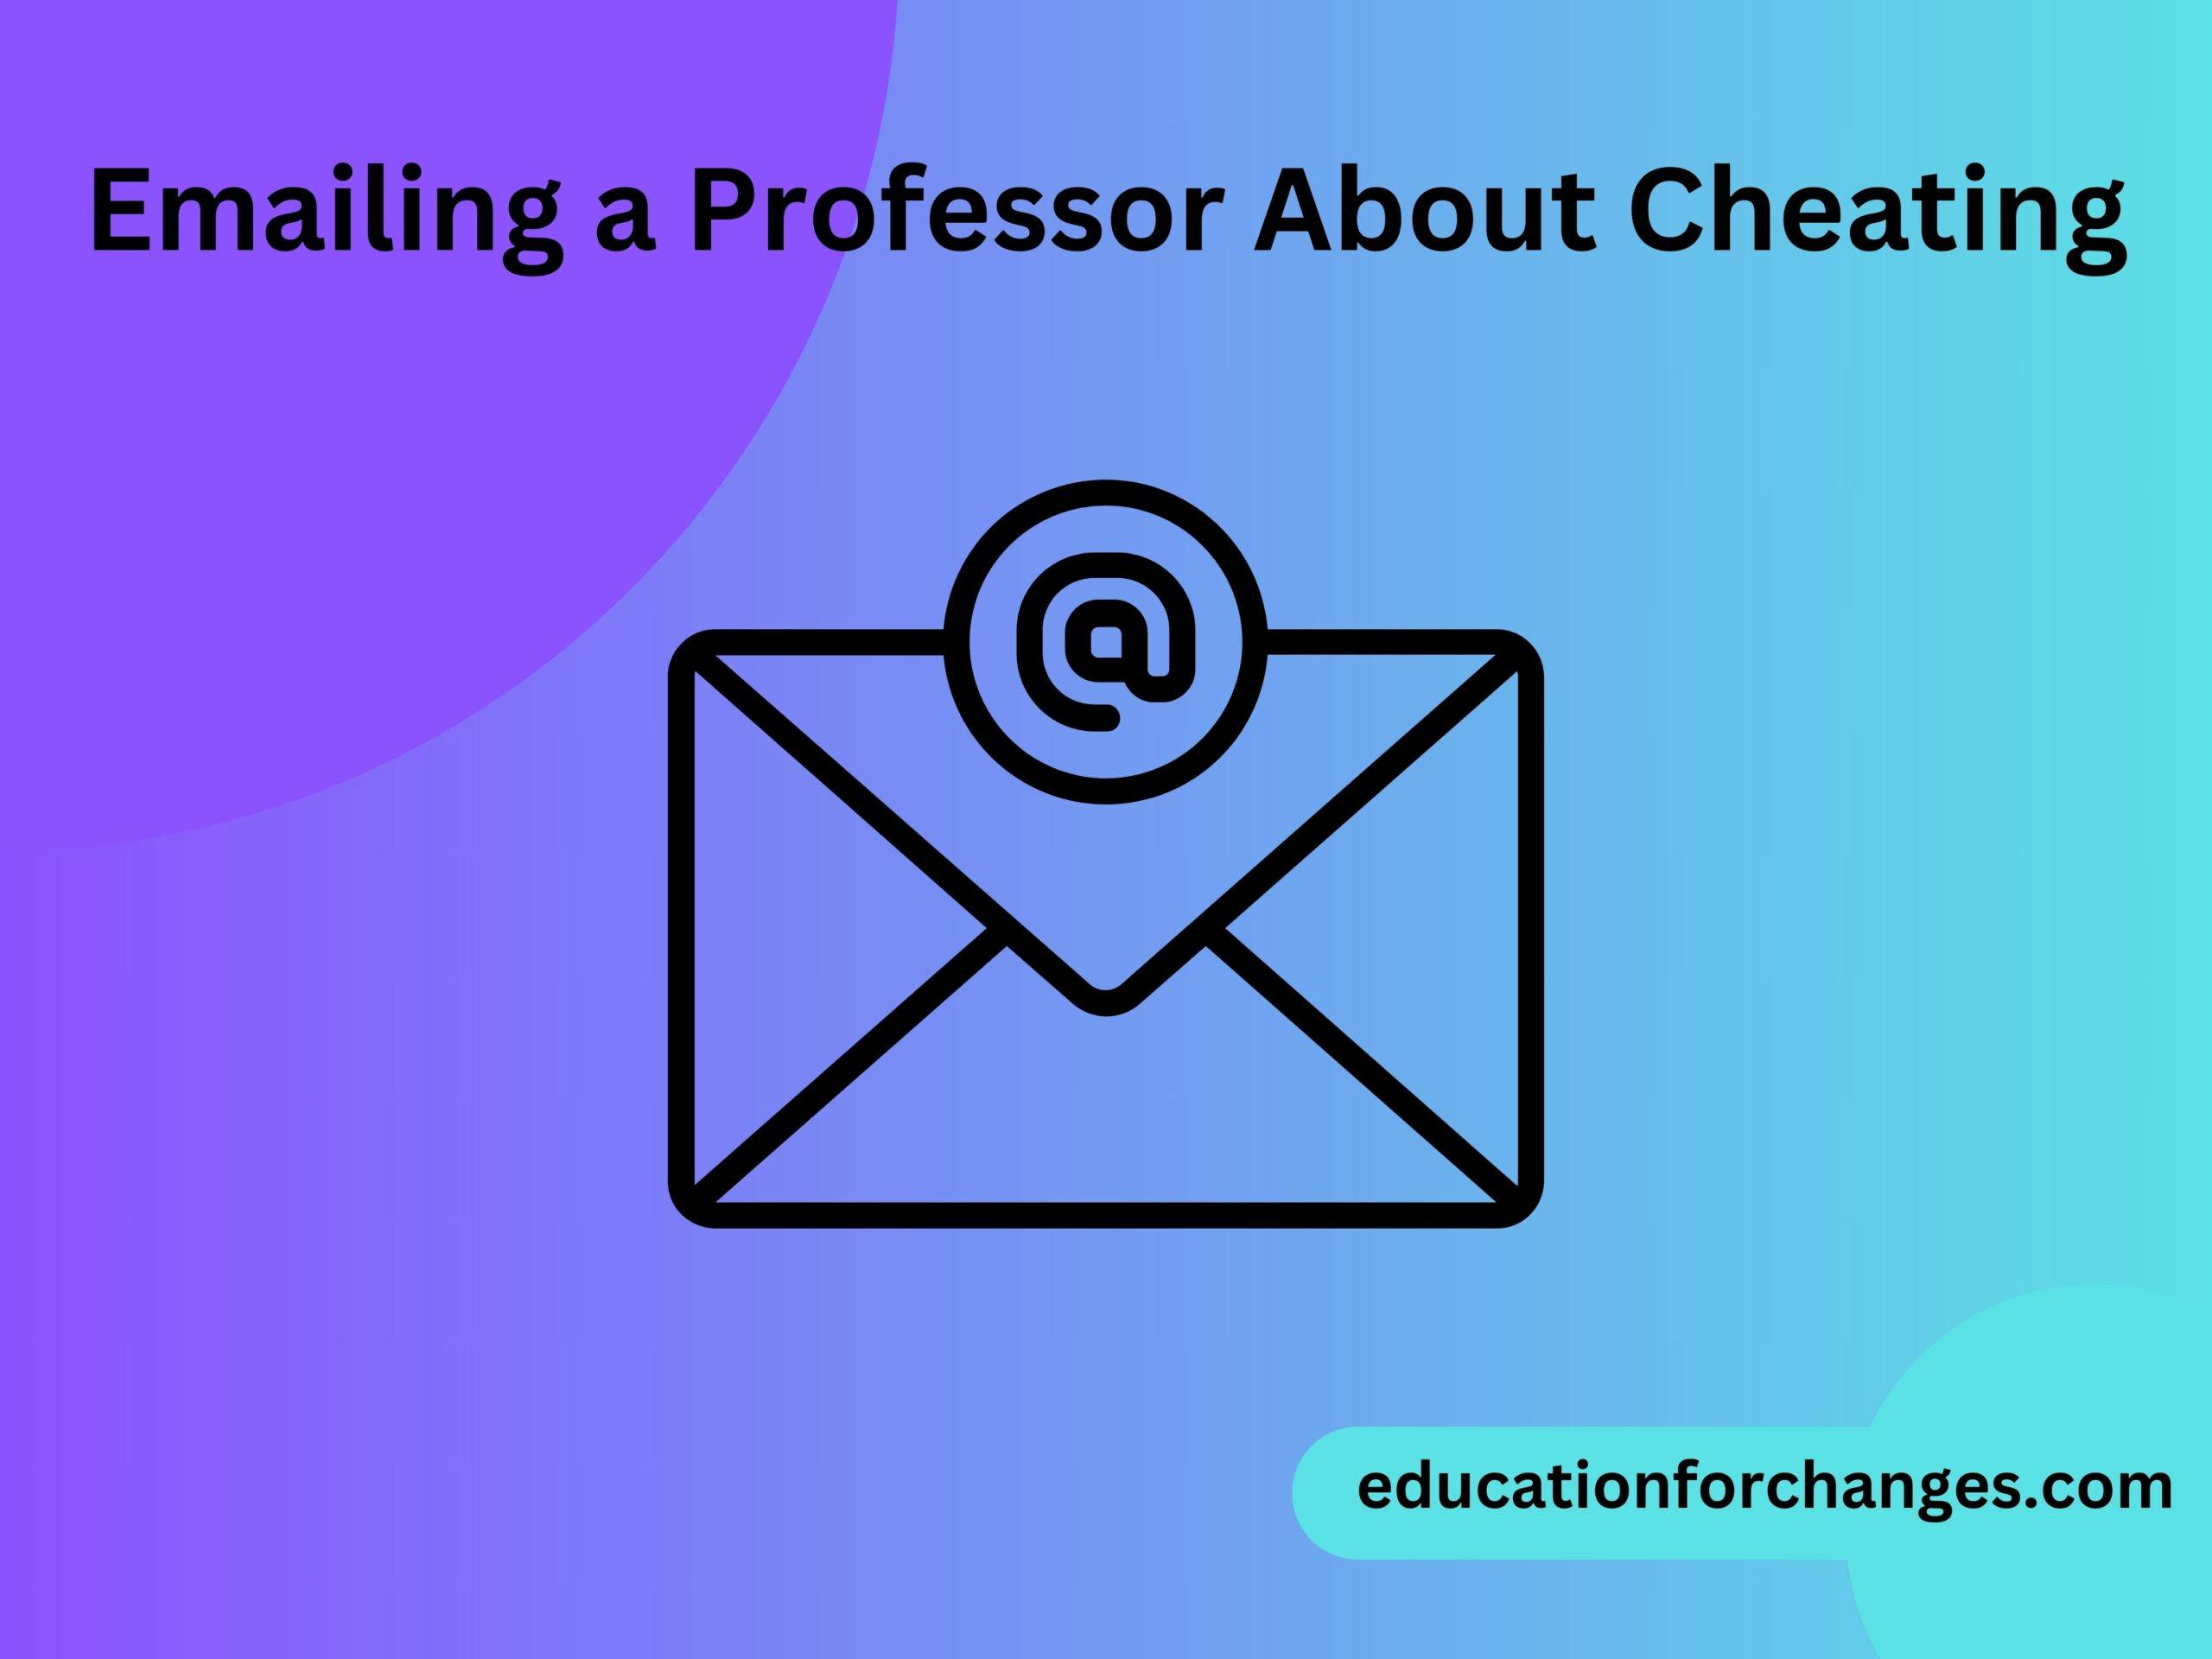 Emailing a Professor About Cheating